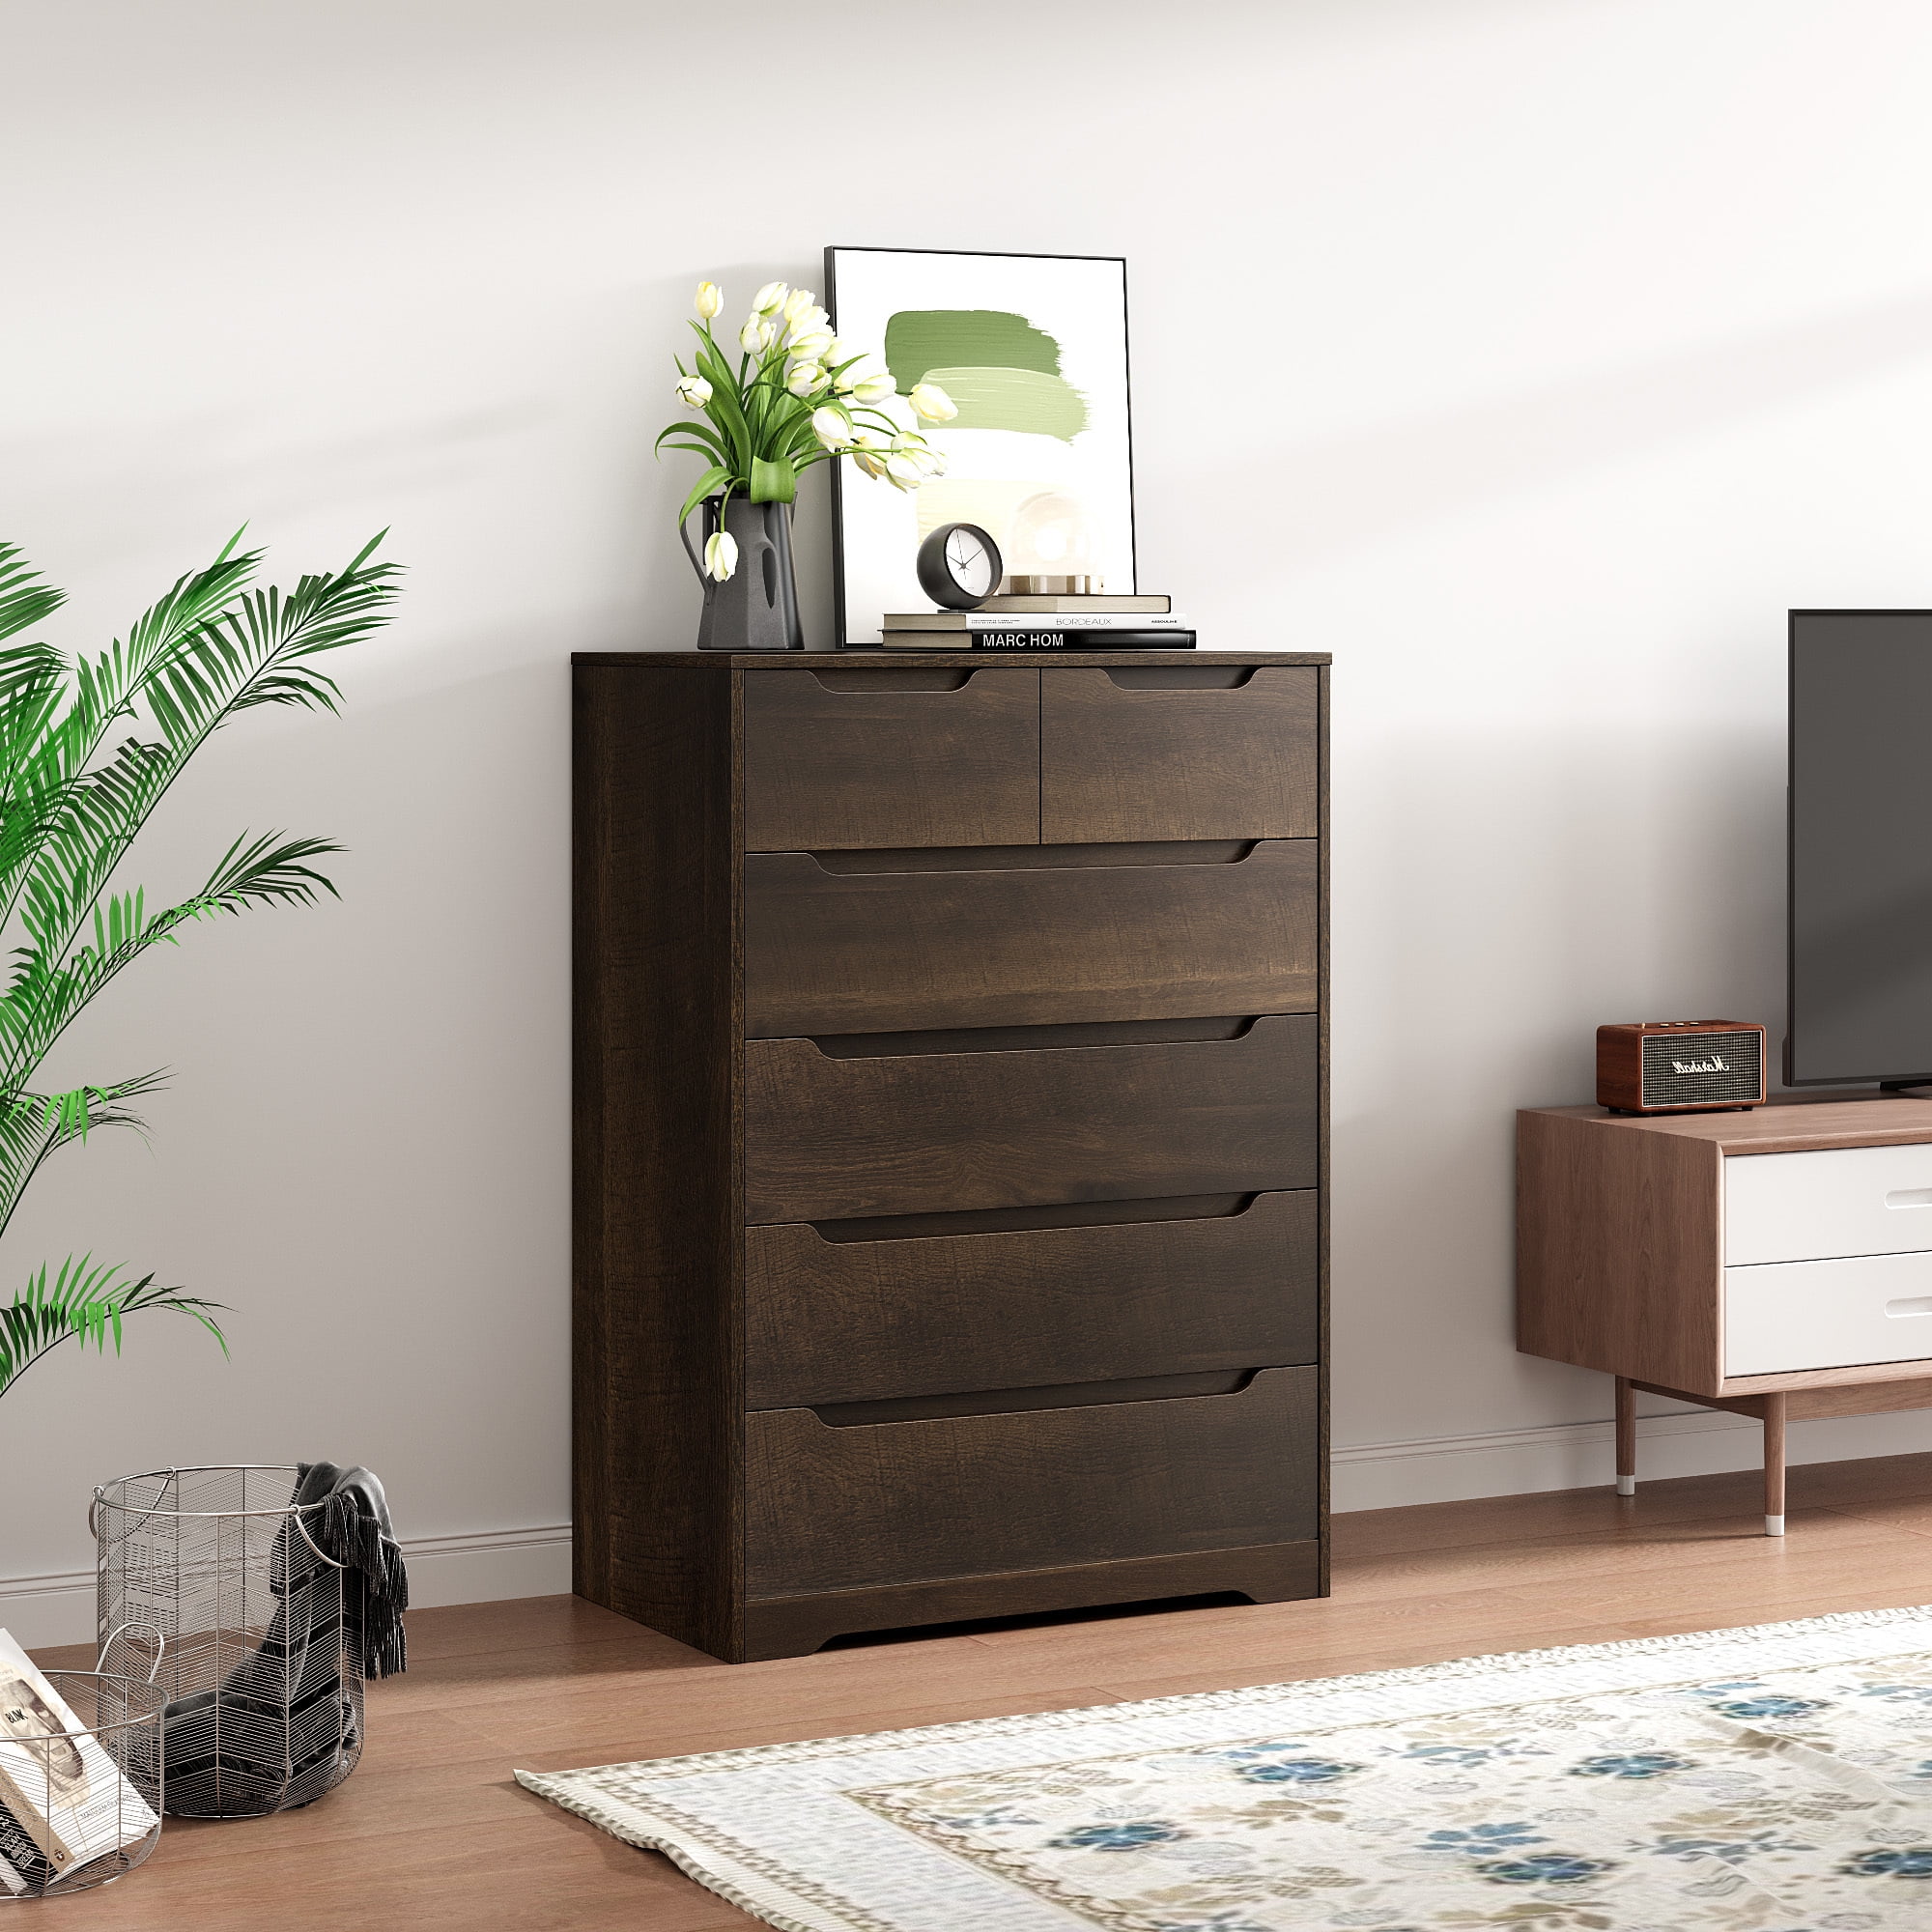 Homfa 6 Drawer Bedroom Dresser, Tall Storage Cabinet Chest of Drawers for Living Room, Dark Brown